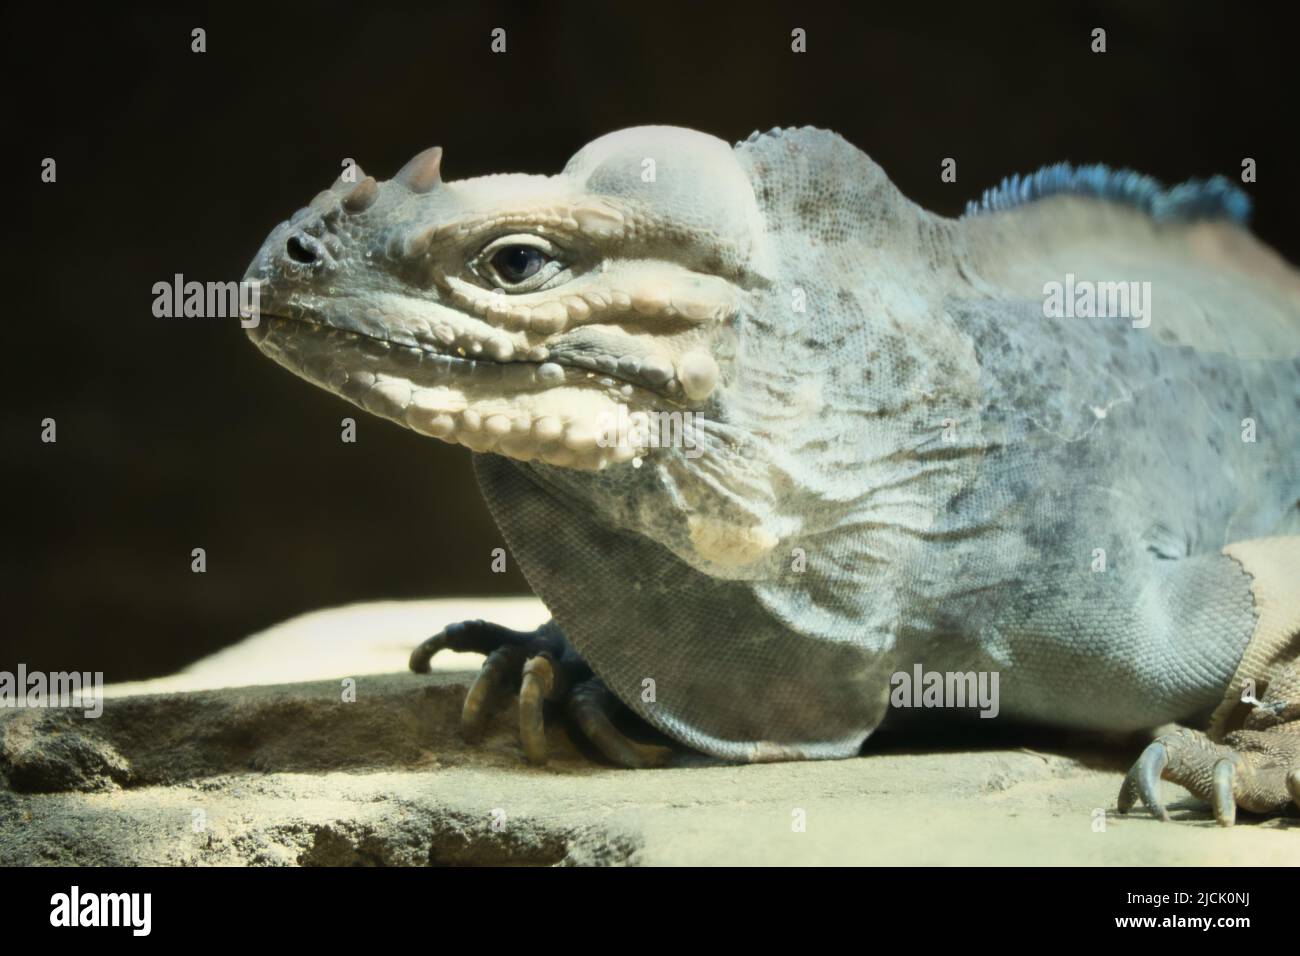 large iguana lying on a stone. Thorny comb and scaly skin. Animal photo of a reptile Stock Photo